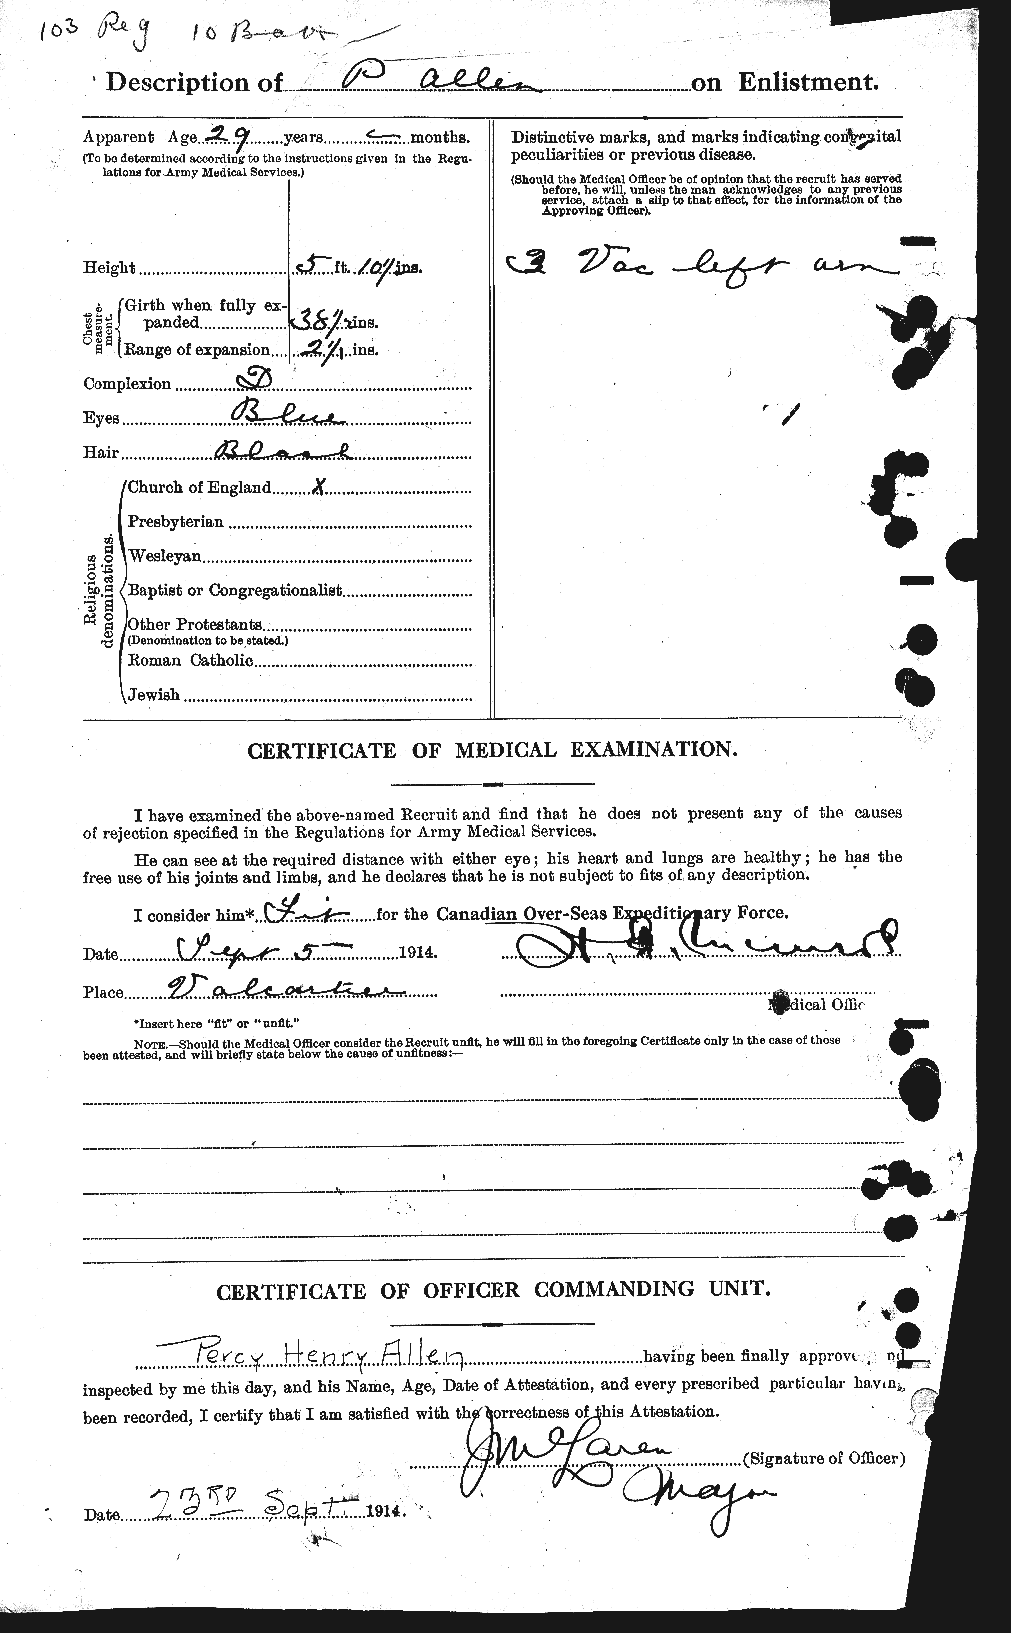 Personnel Records of the First World War - CEF 207103b